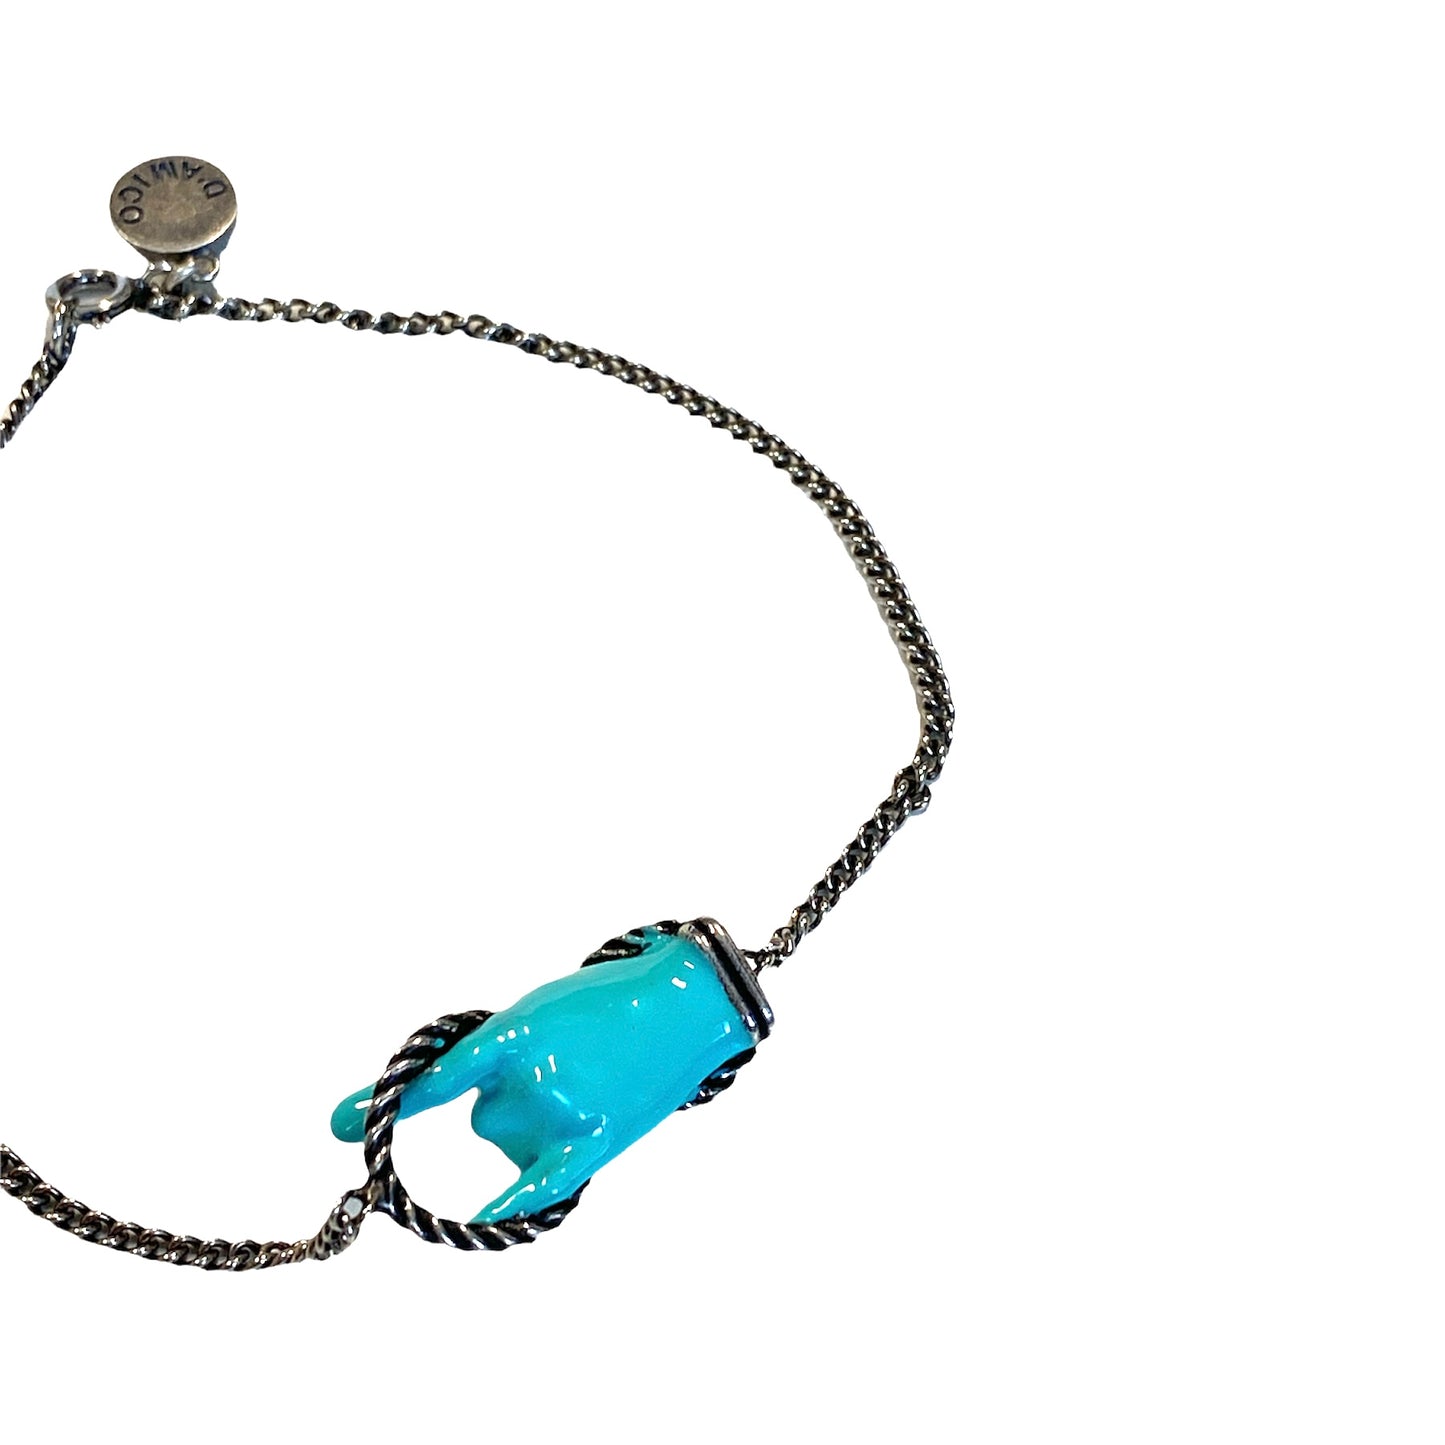 Turquoise Lacquered "Horn" Chain Bracelet